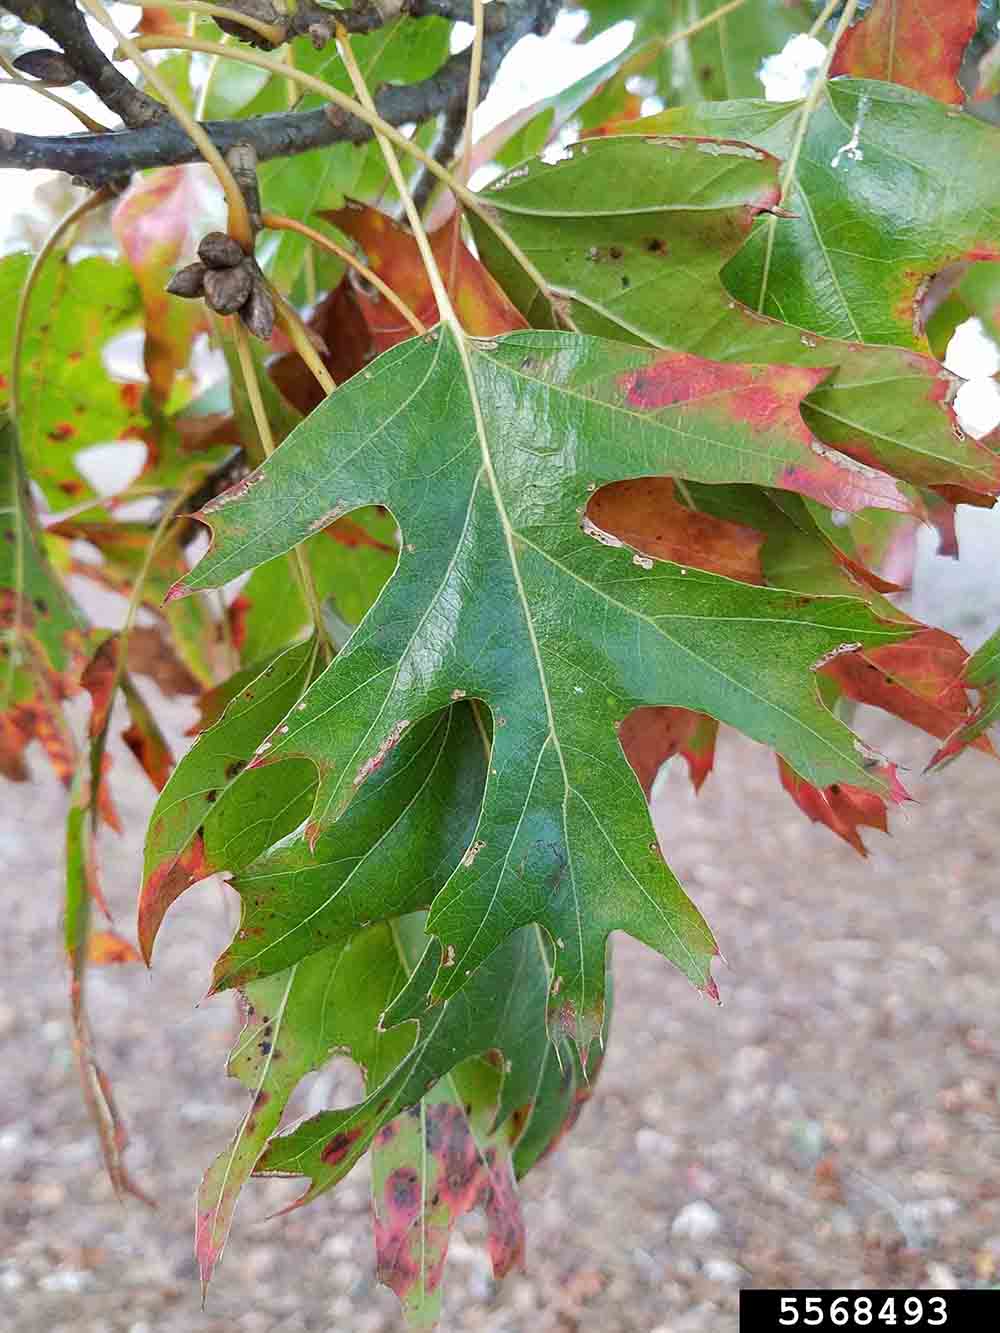 Shumard oak leaf, showing lobes and bristles on the tips